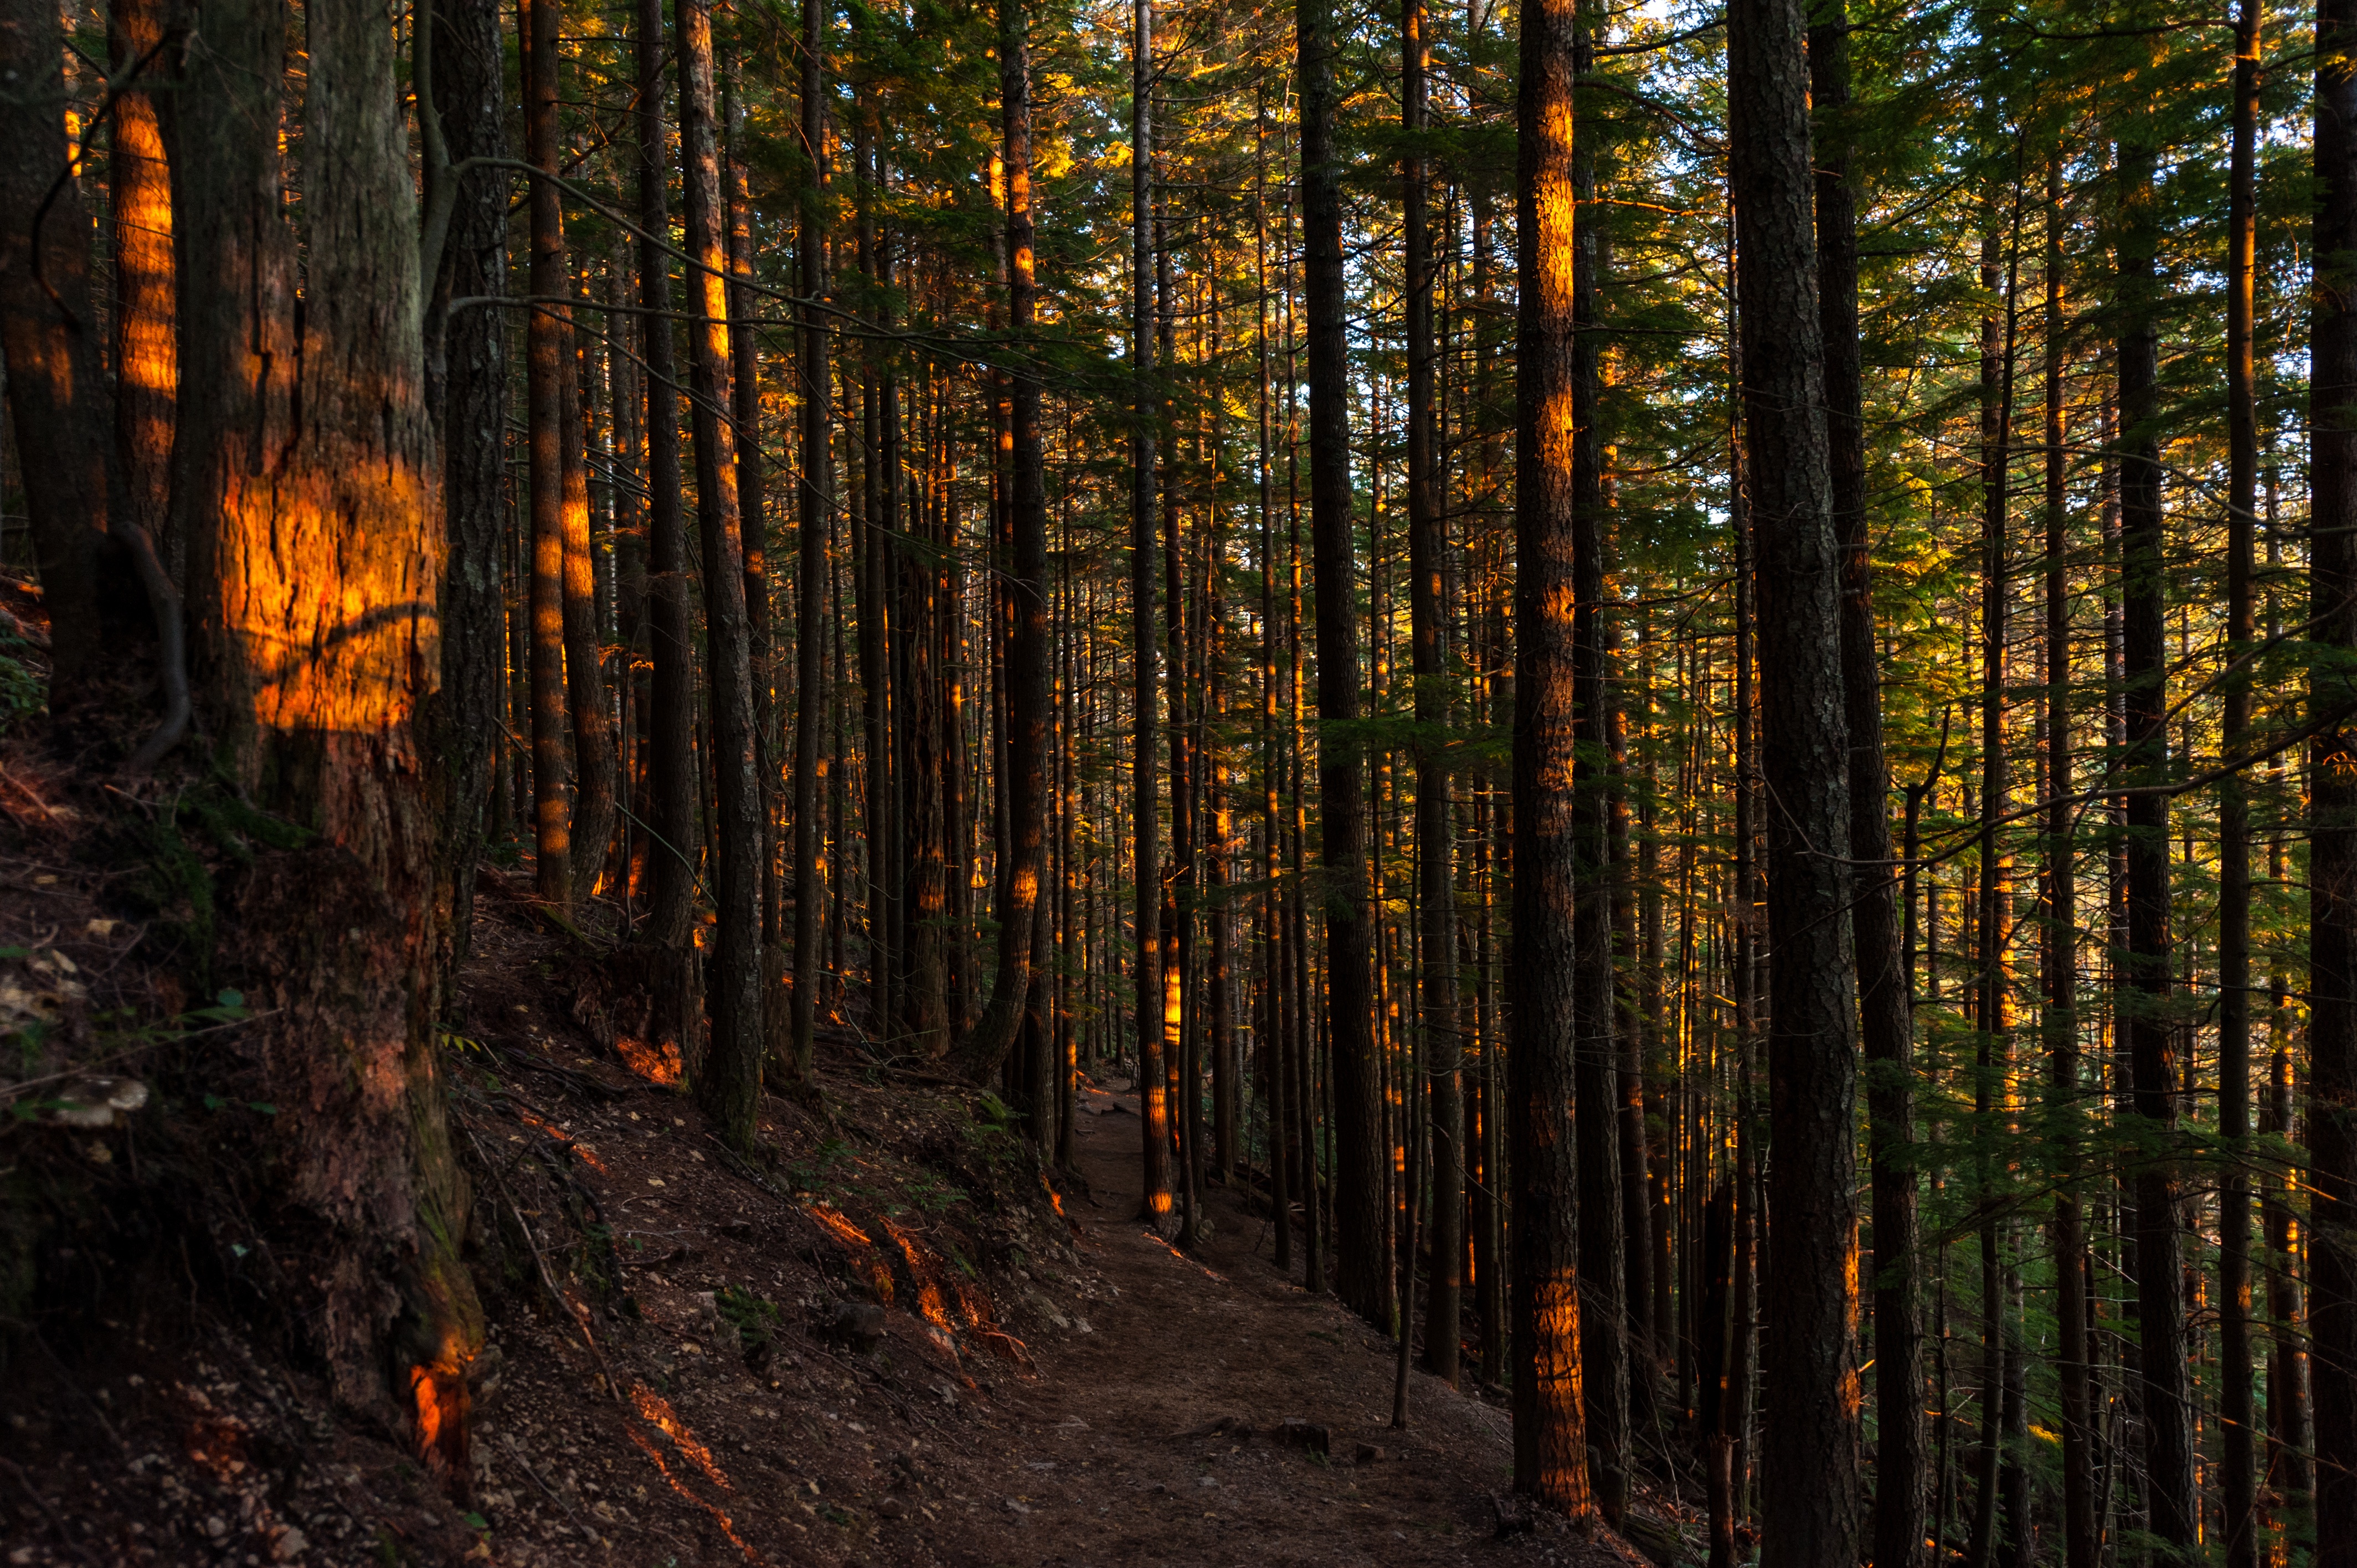 Evening light in a coniferous forest